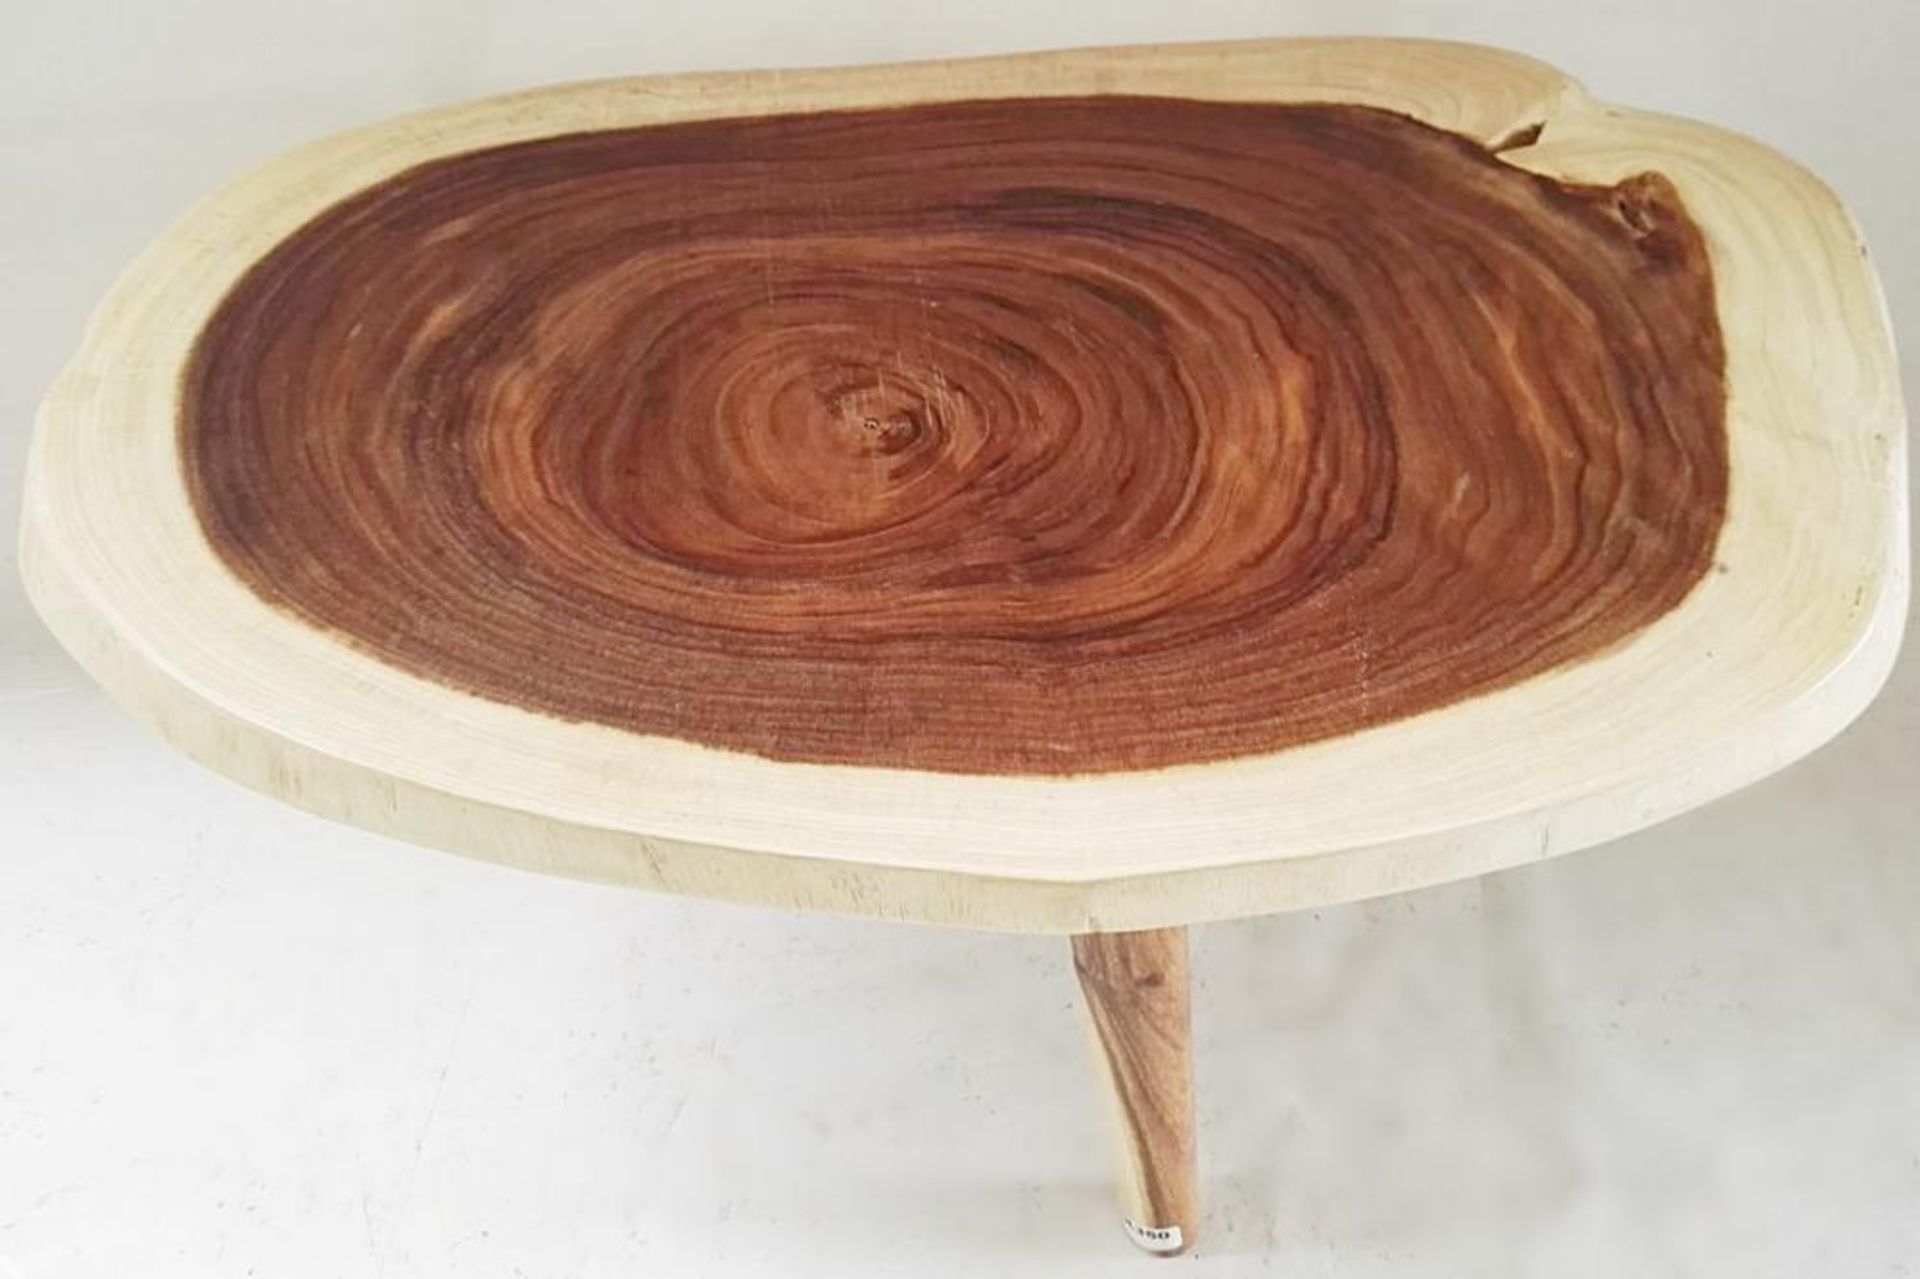 1 x Unique Three Legged Reclaimed Solid Tree Trunk Coffee Table - Dimensions (approx): W90 x D56cm, - Image 5 of 5